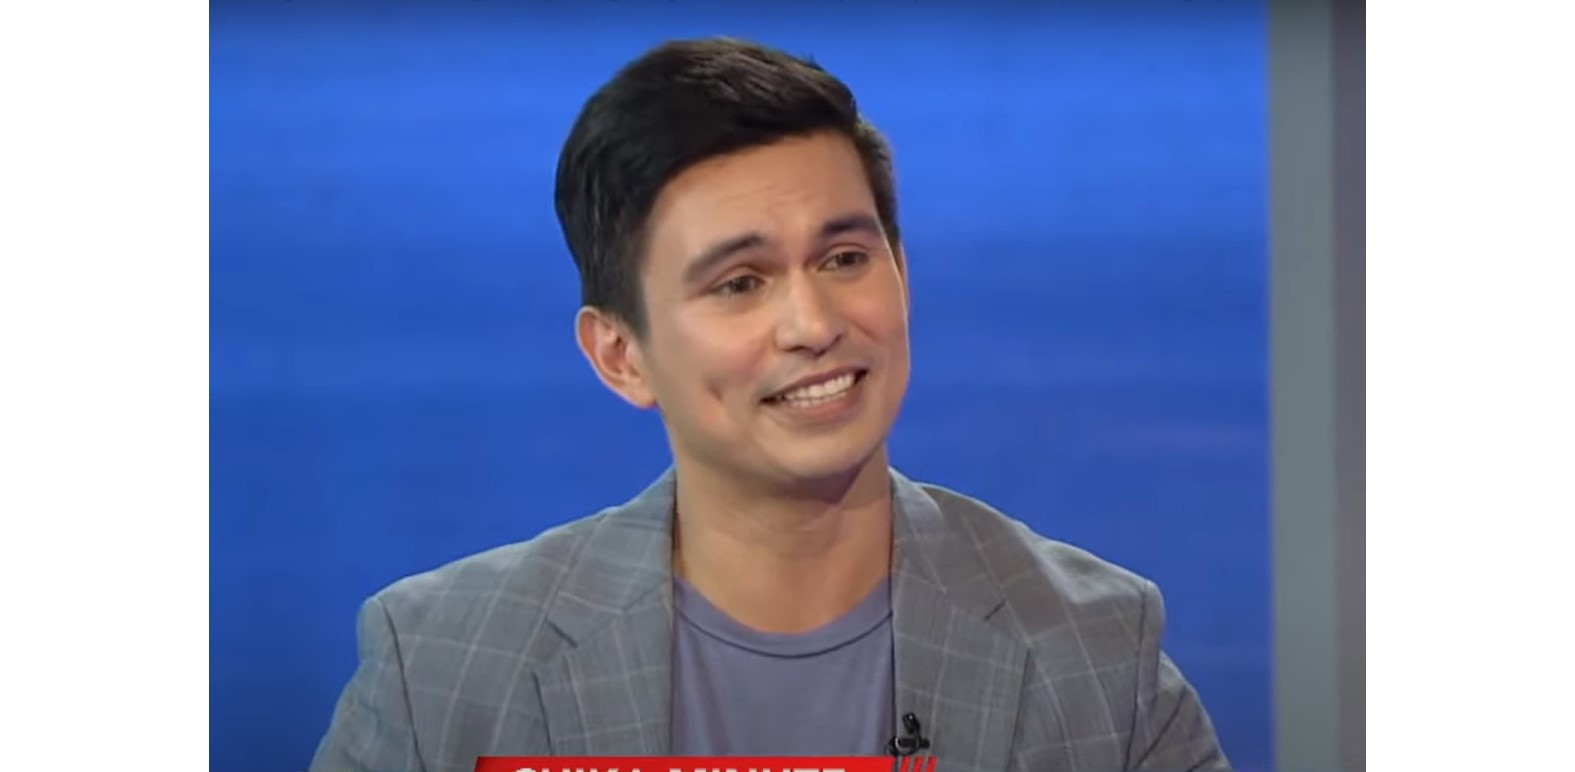 tom rodriguez ready to fall in love again, says he's seeing someone